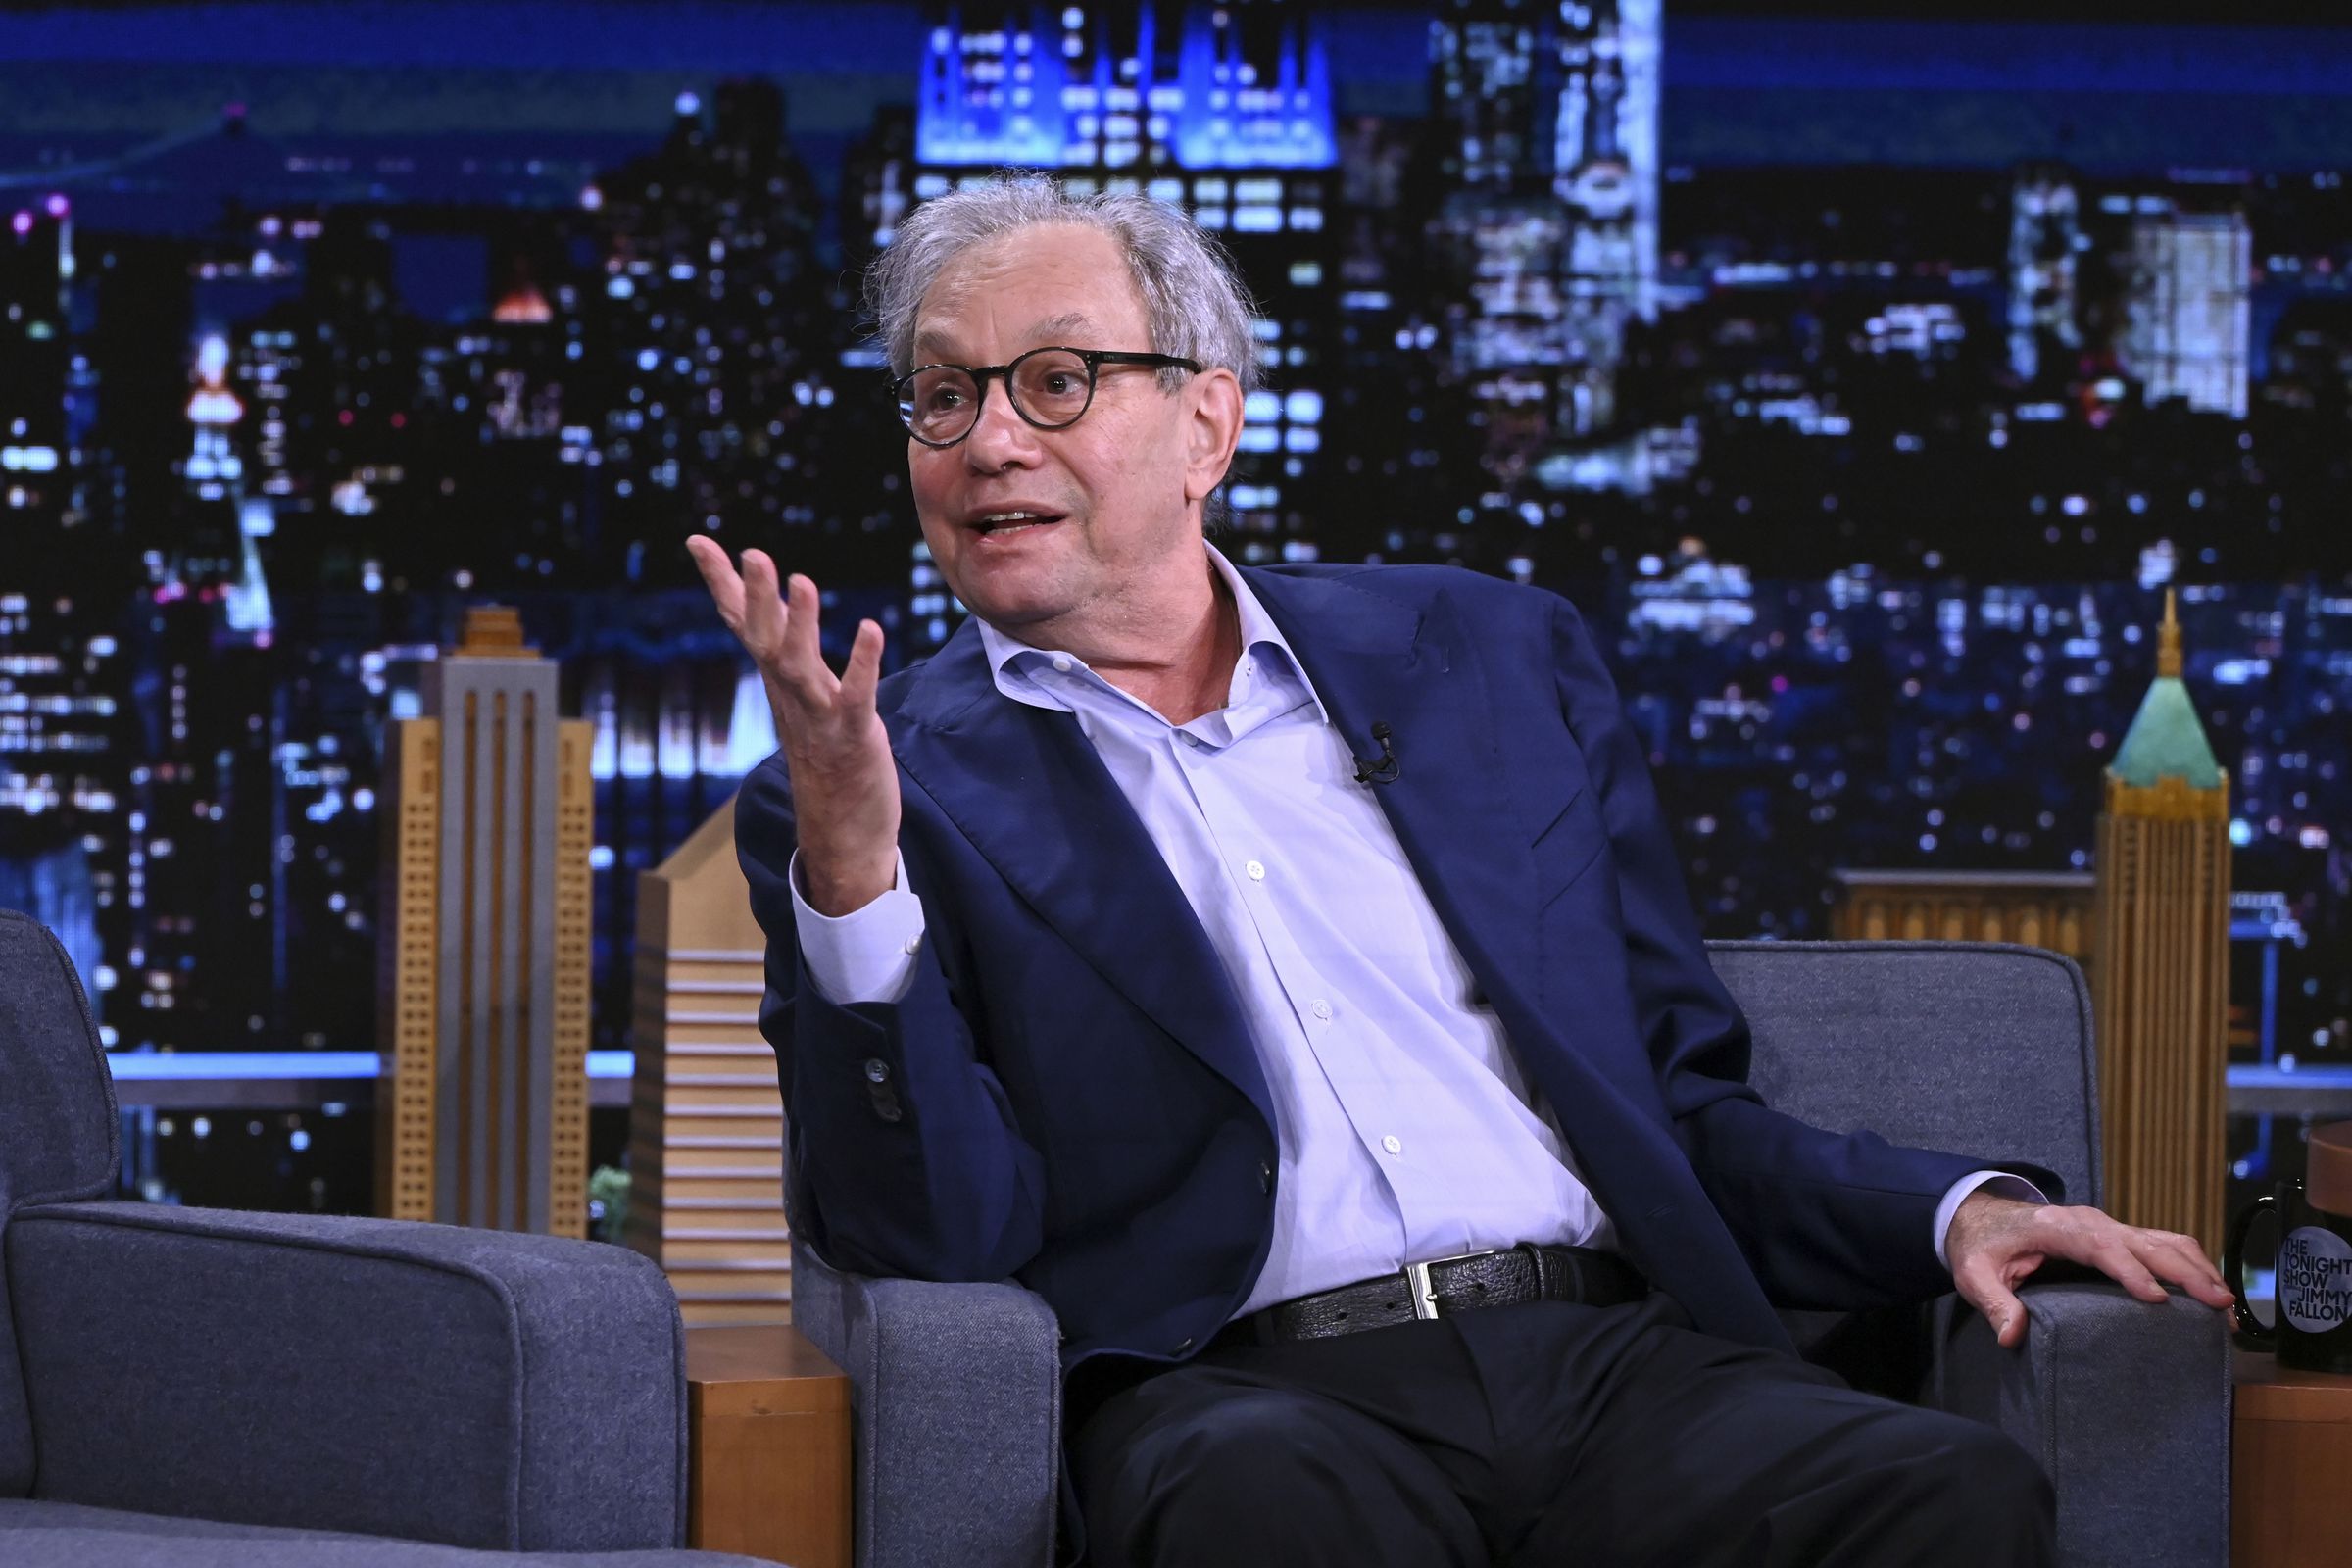 Lewis Black on The Tonight Show Starring Jimmy Fallon